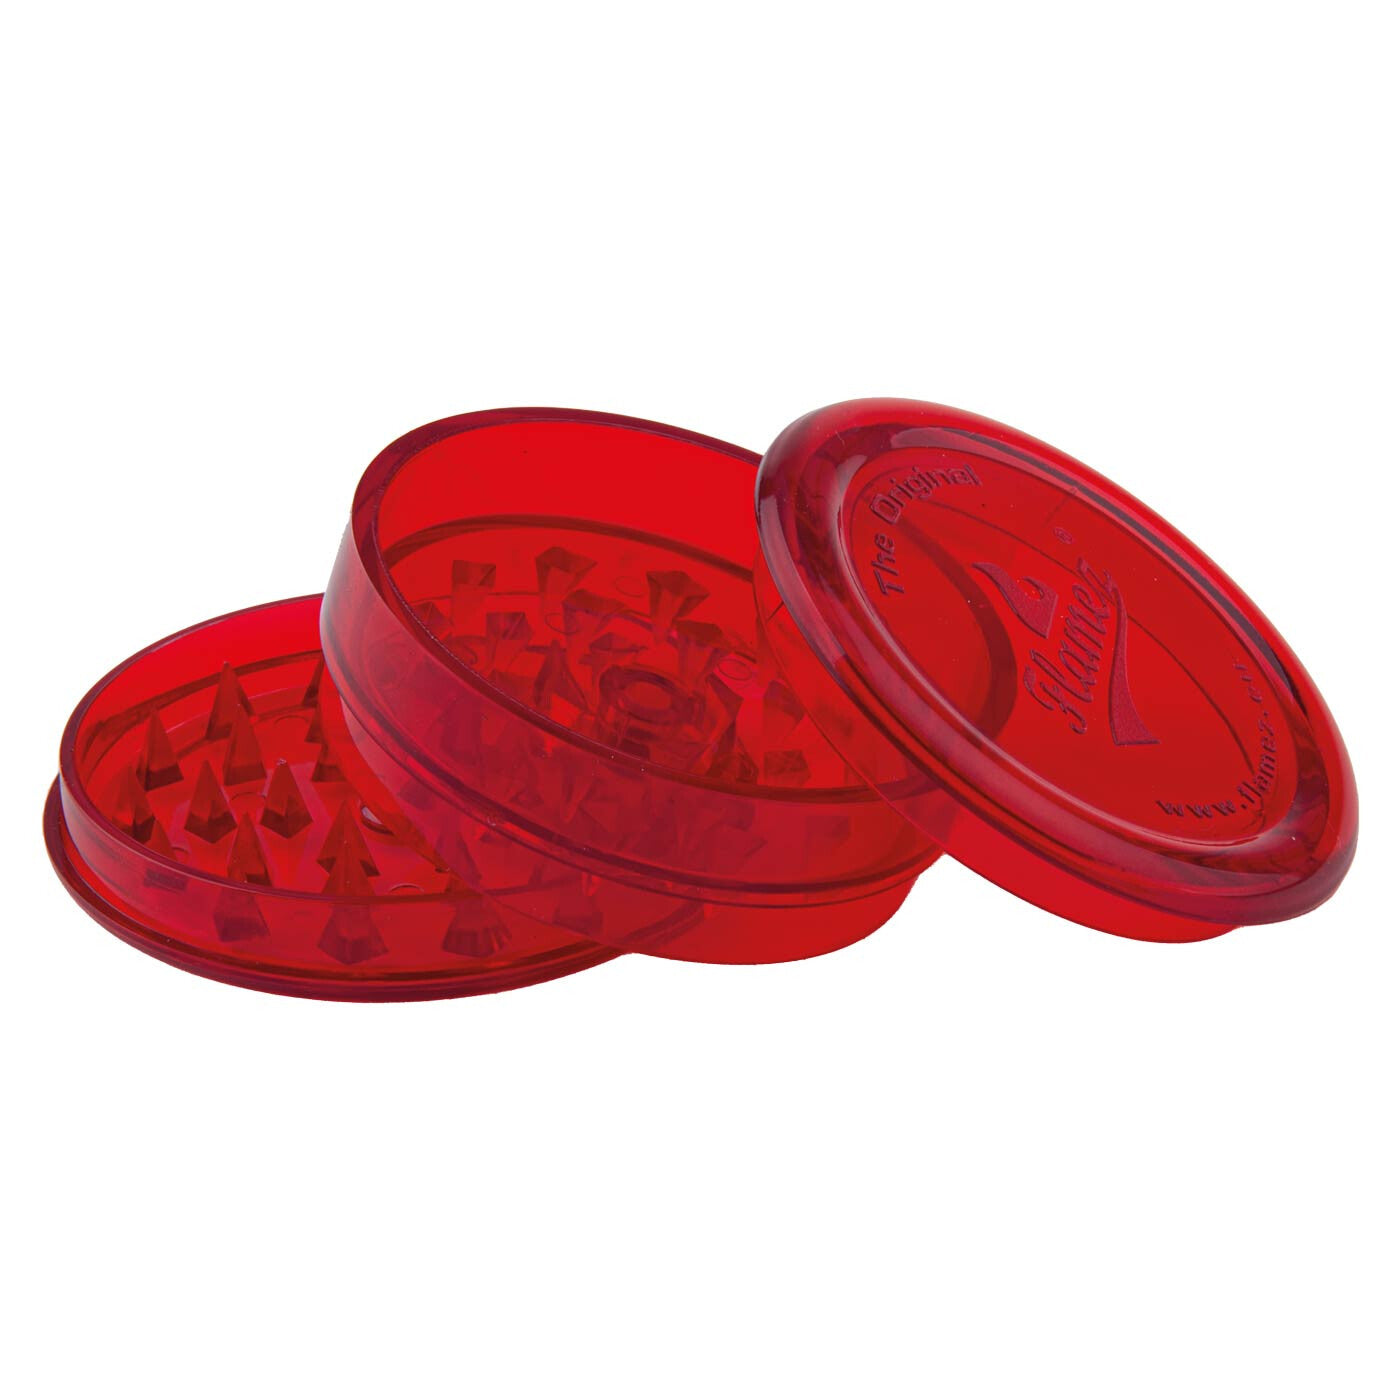 Acrylic Super Grinder With Stash Compartment Red open